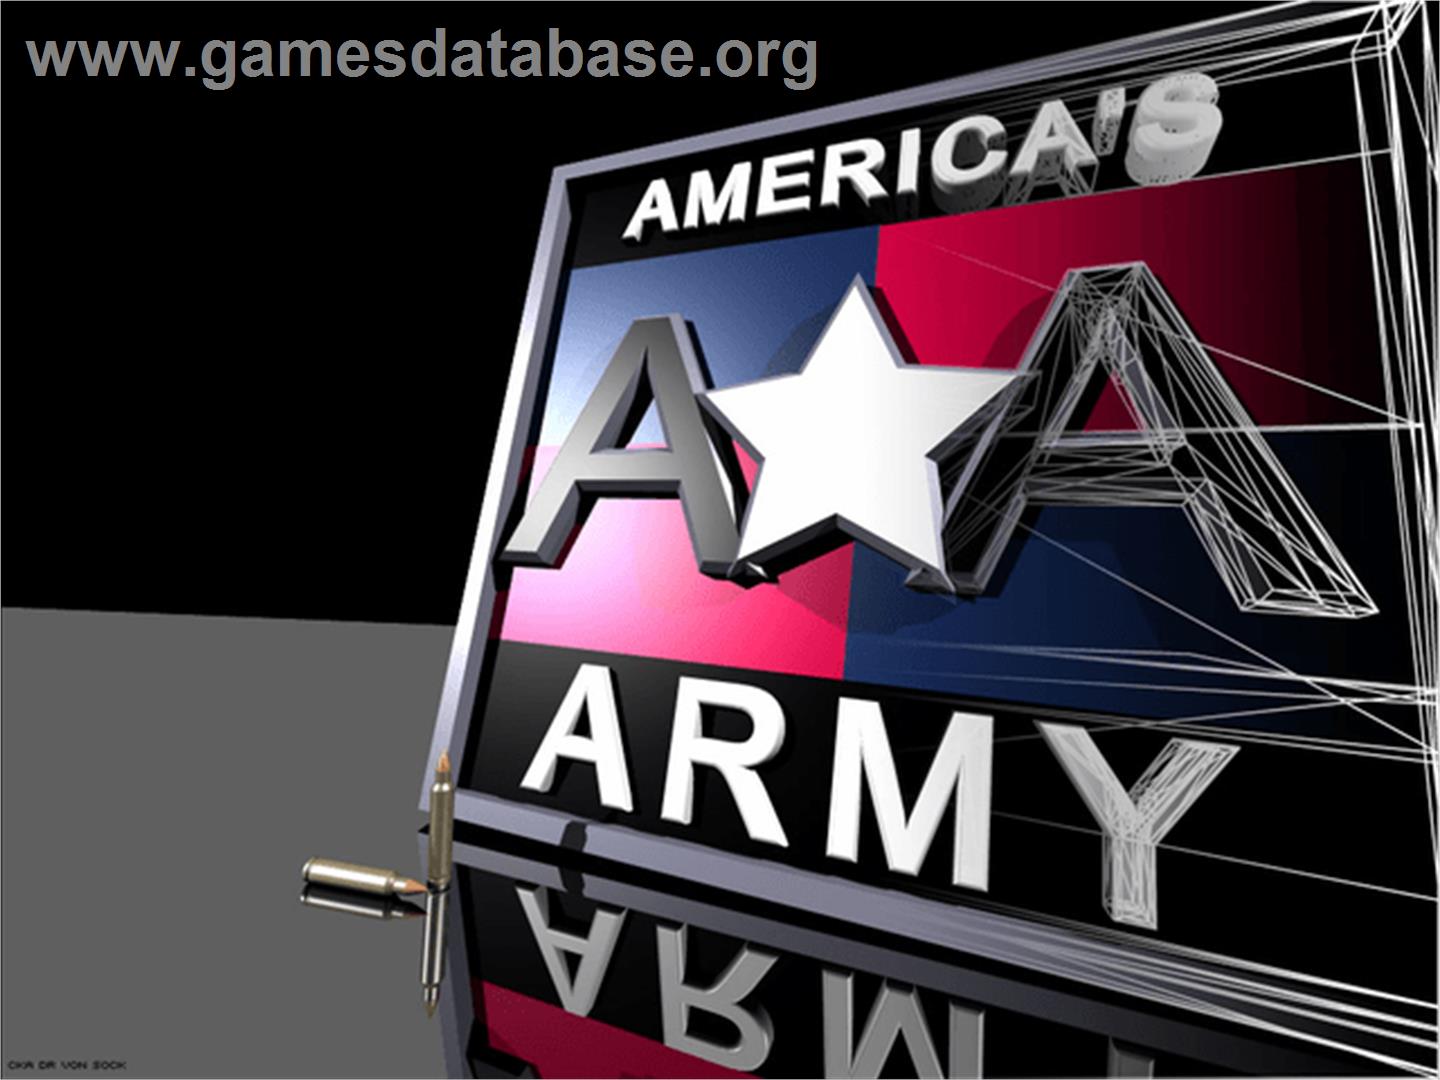 America's Army: Rise of a Soldier - Microsoft Xbox - Artwork - Title Screen